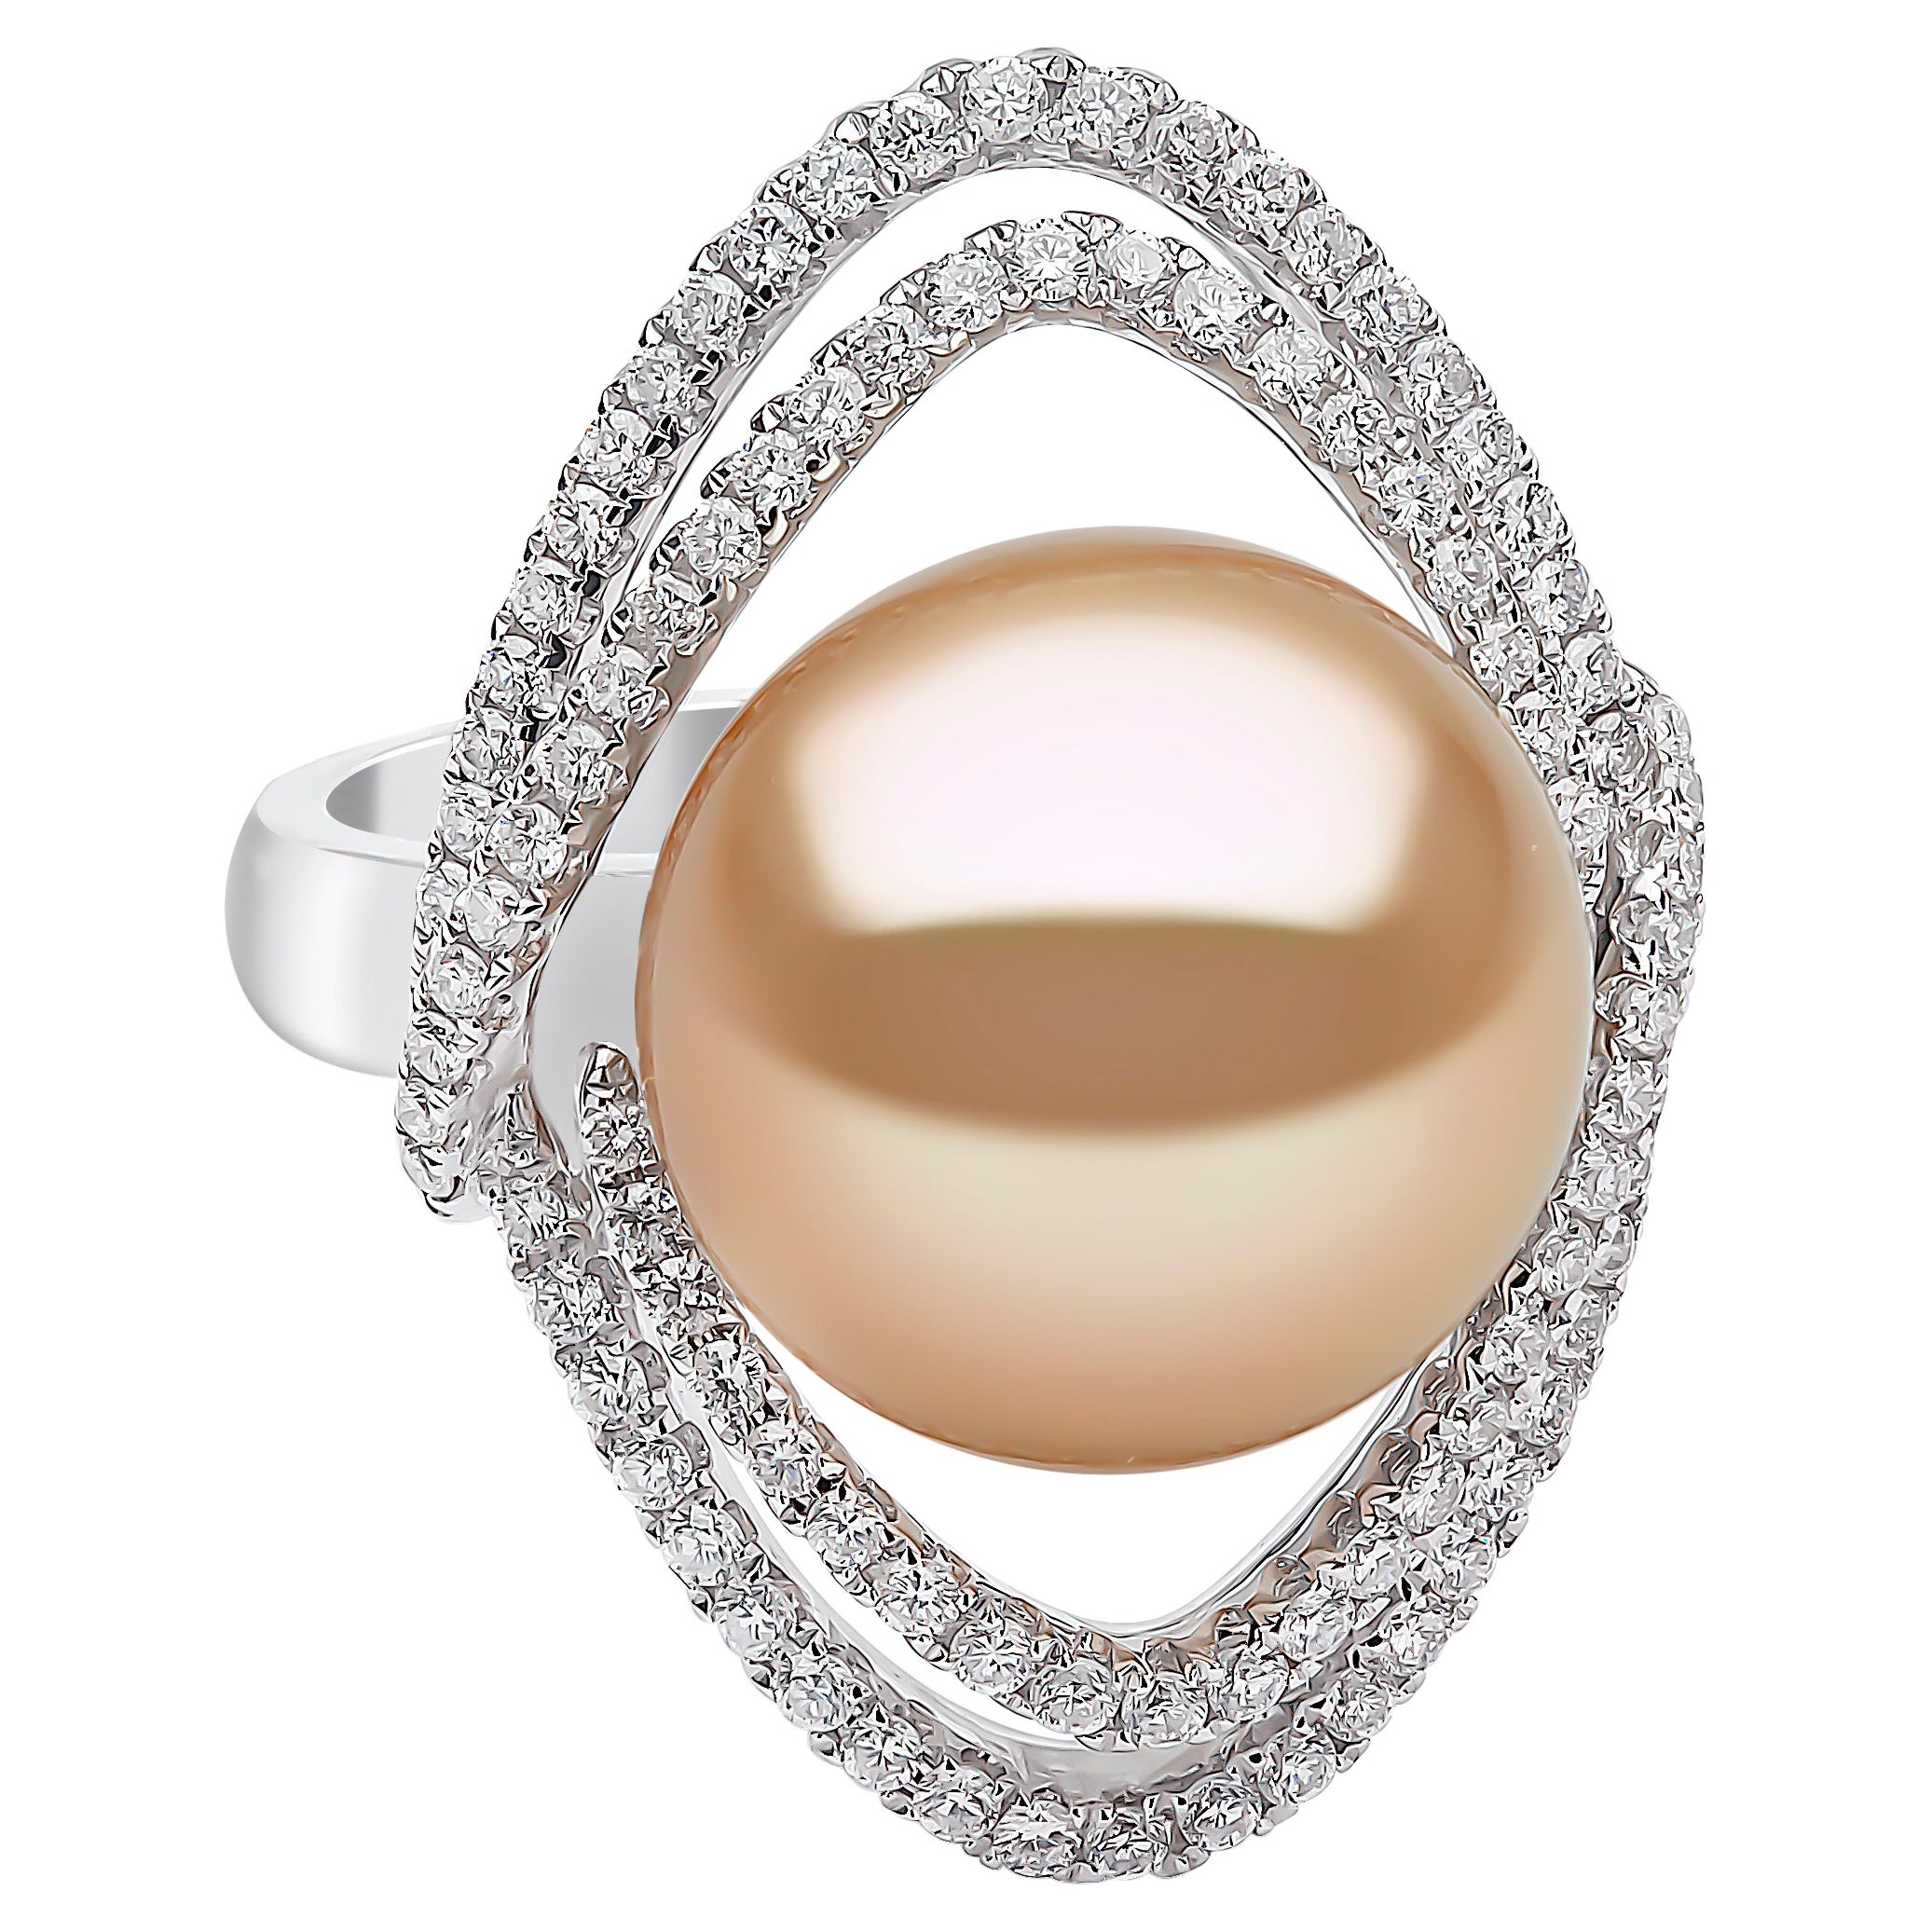 Yoko London Golden South Sea Pearl and Diamond Ring in 18K White Gold